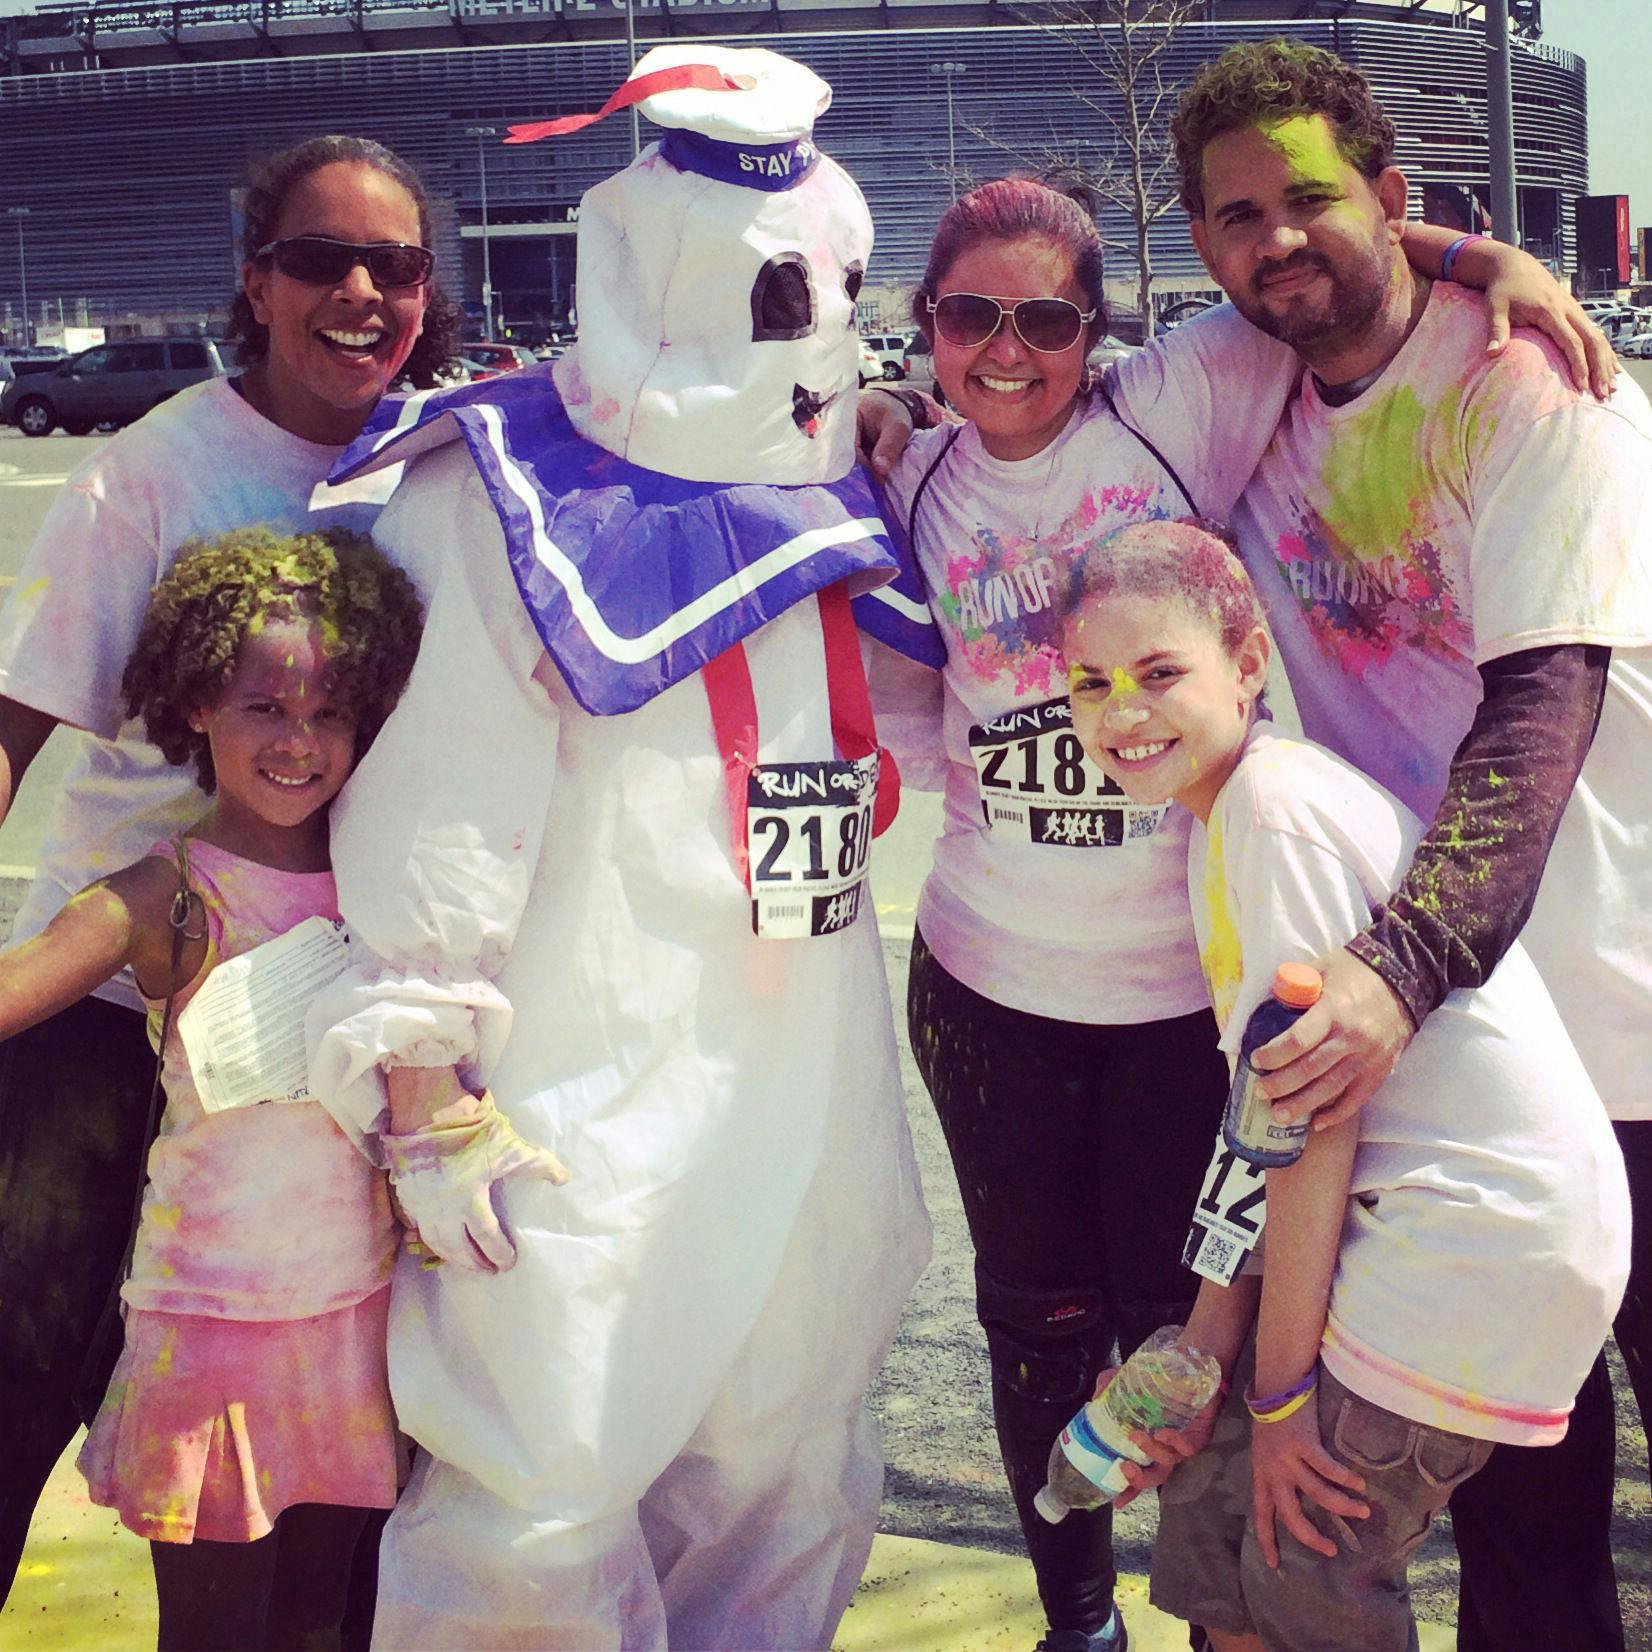 Even races become a fun family affair, yep the marshmallow is family too. Lol!